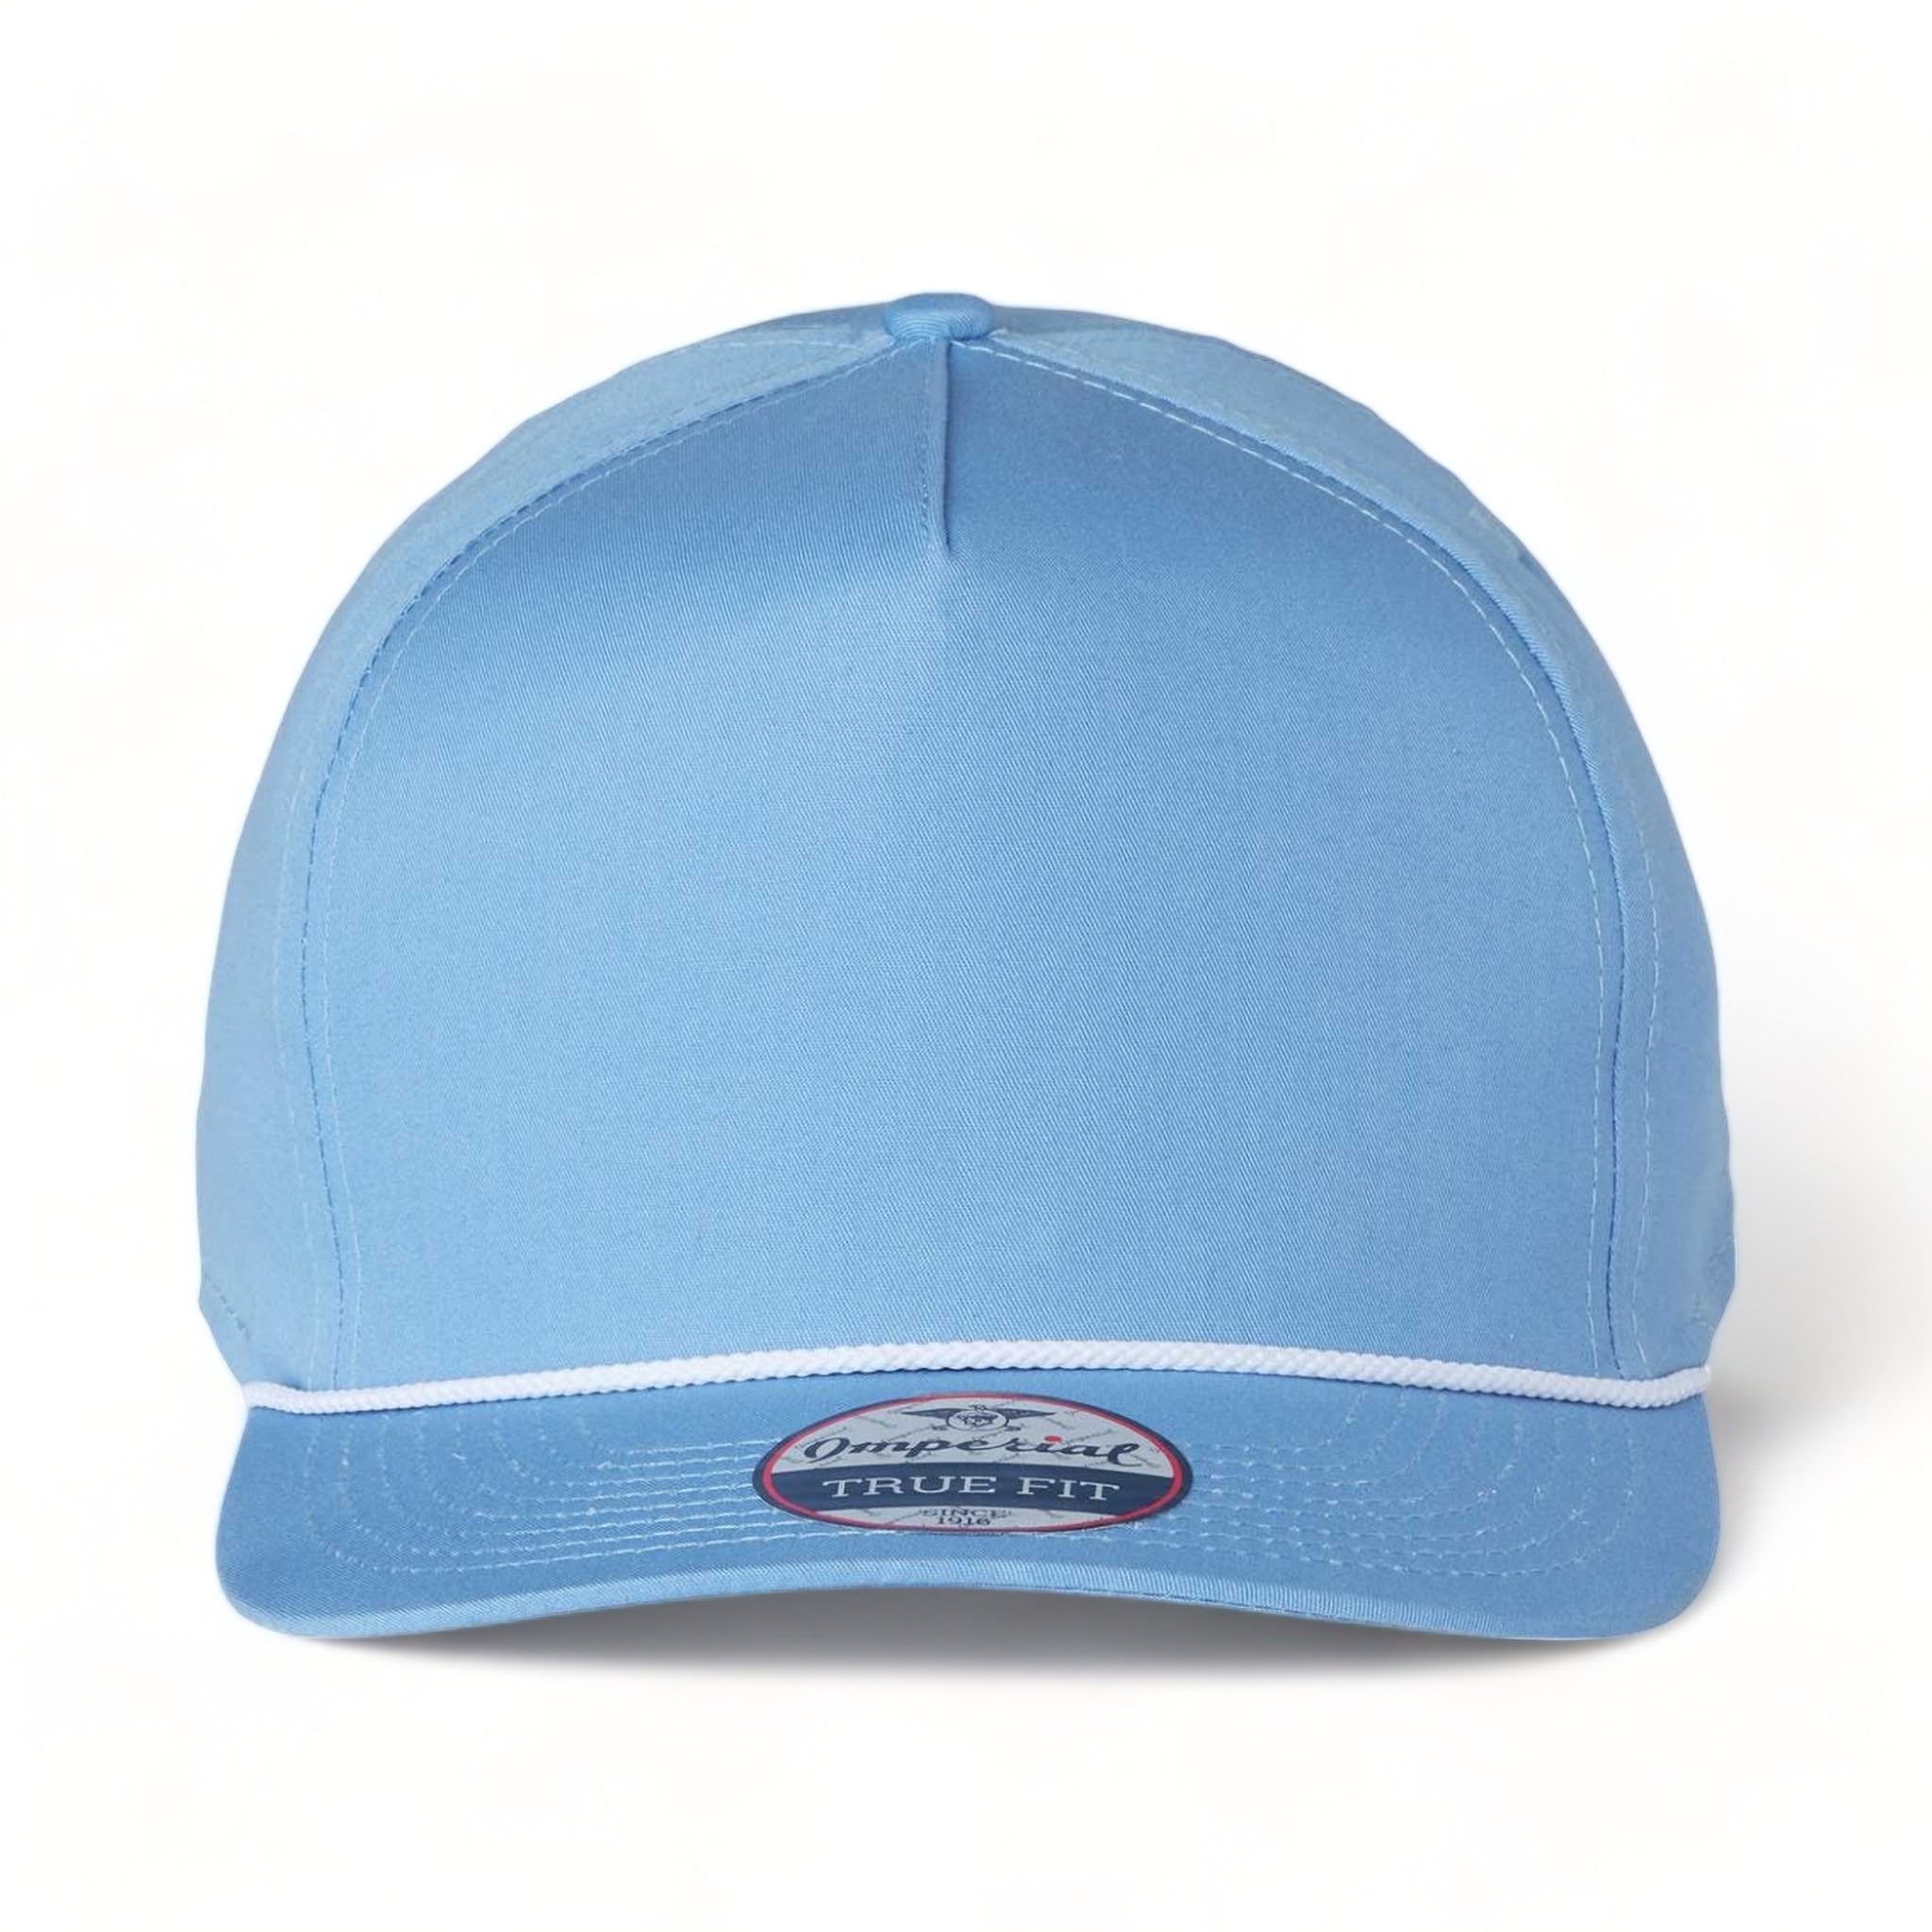 Front view of Imperial 5056 custom hat in powder blue and white